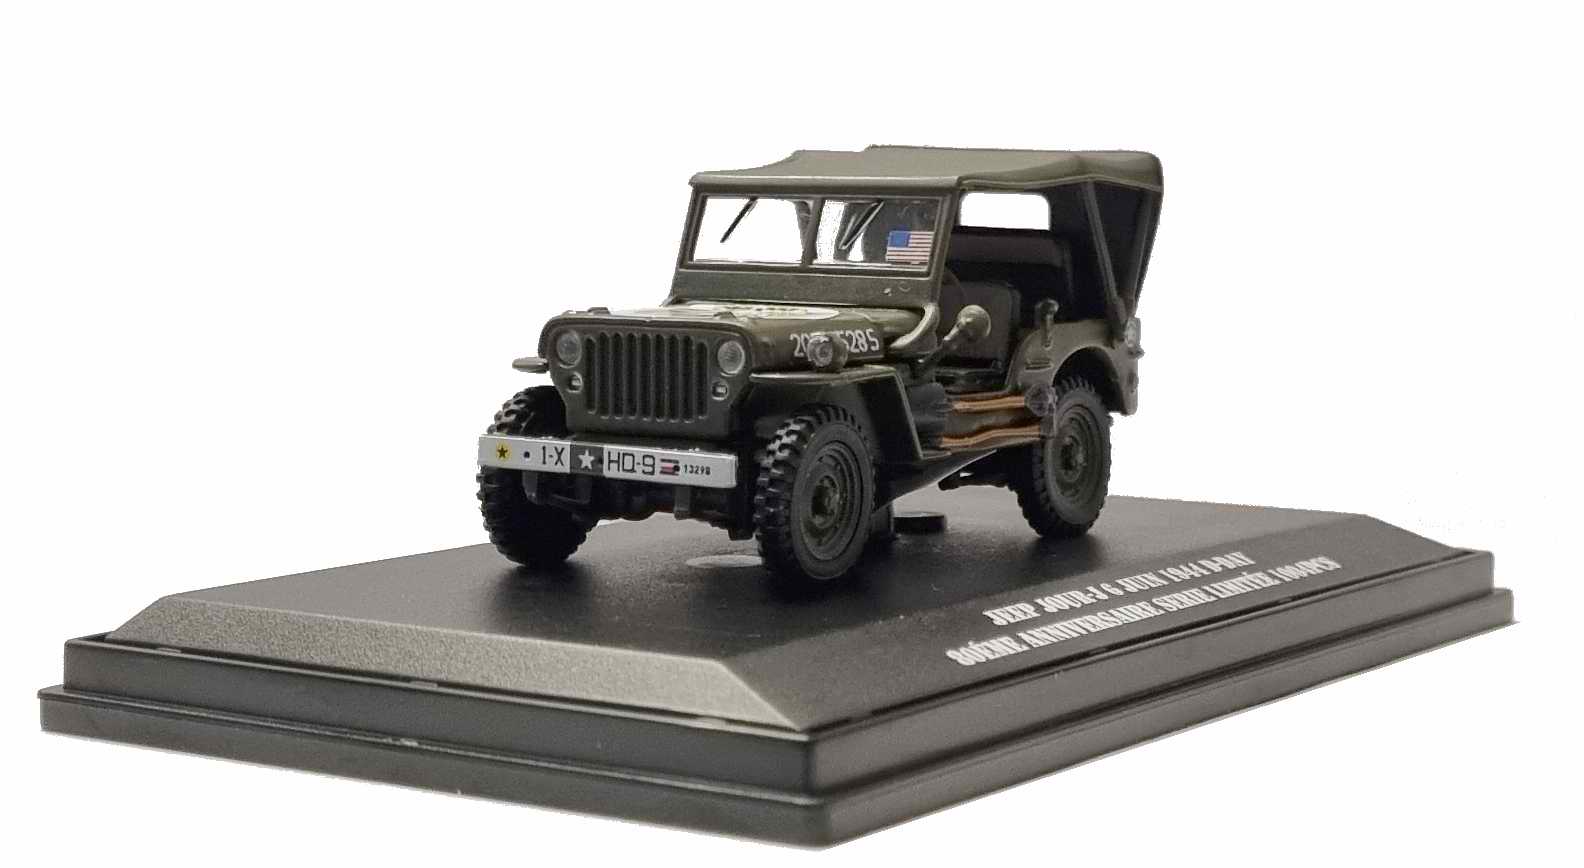 Voiture Jeep Willys capote Militaire US ARMY D-DAY 6 Juin 1944 Oliex 1/43